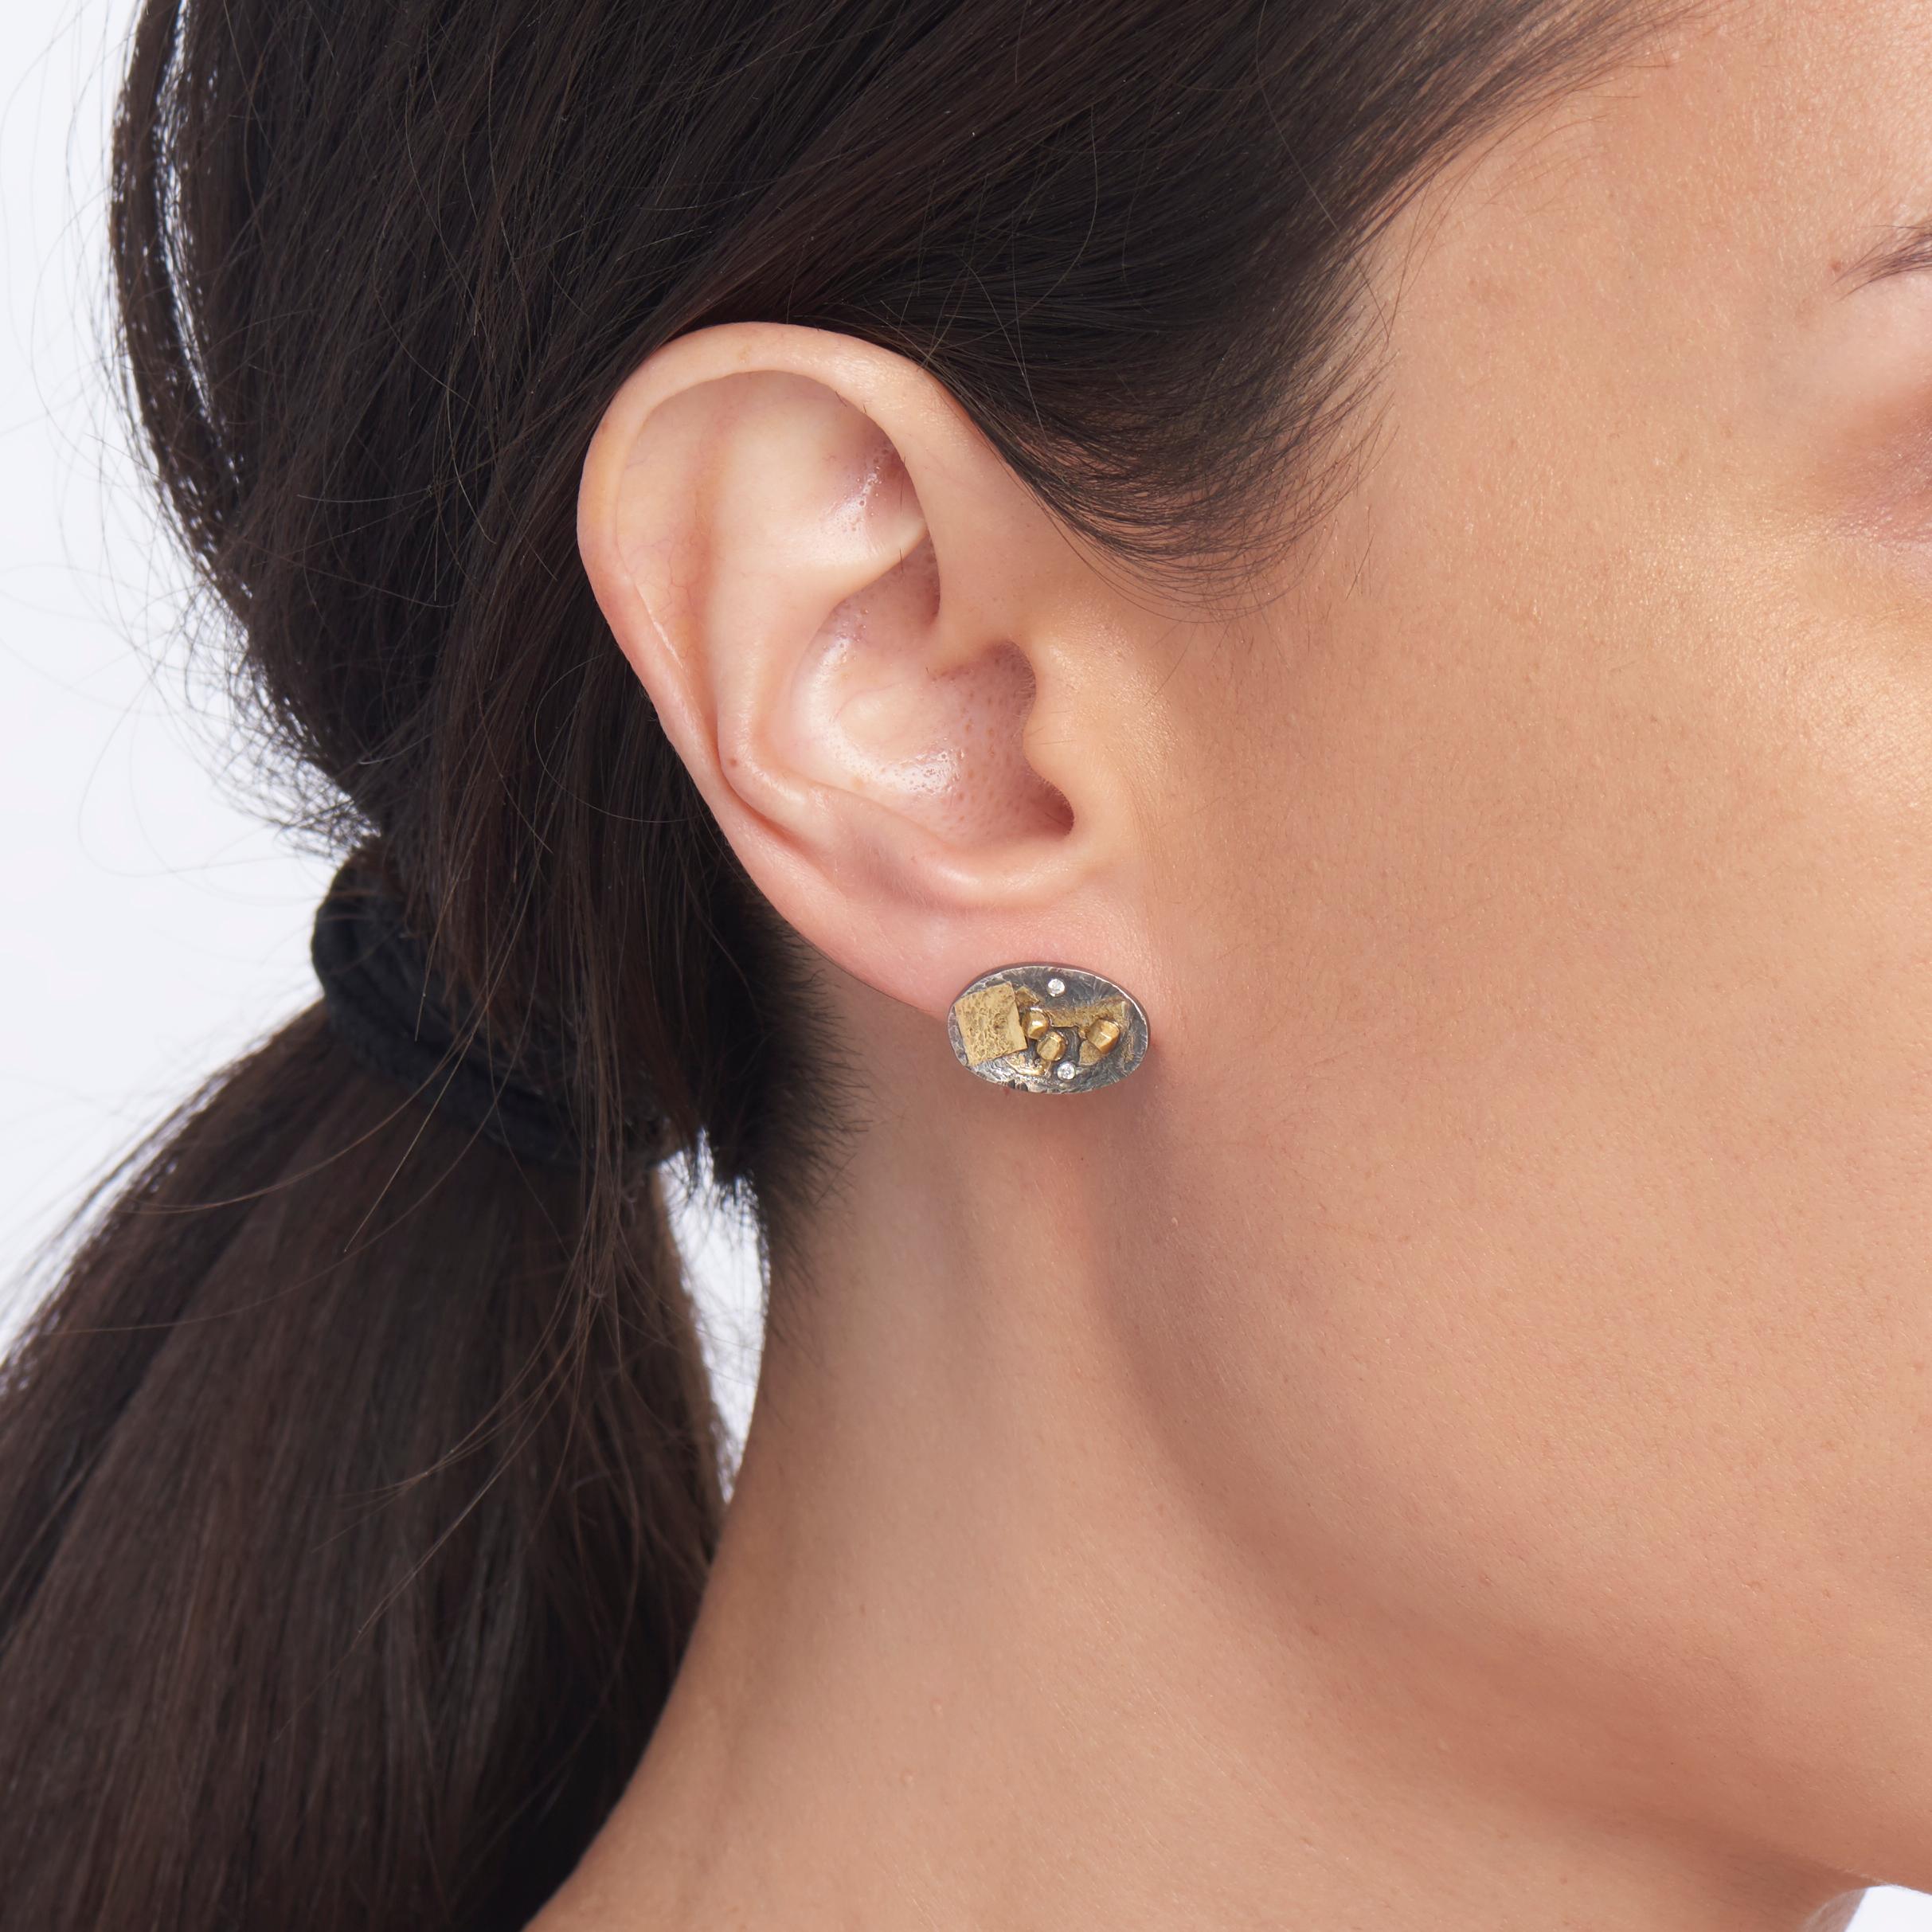 Fragments of 22 karat yellow gold and tiny white diamonds (.08 total carat weight) give these contemporary mixed metal earrings a poetic feel.  The size of the oval is perfect for daytime wear.  The oxidized sterling silver contrasts beautifully